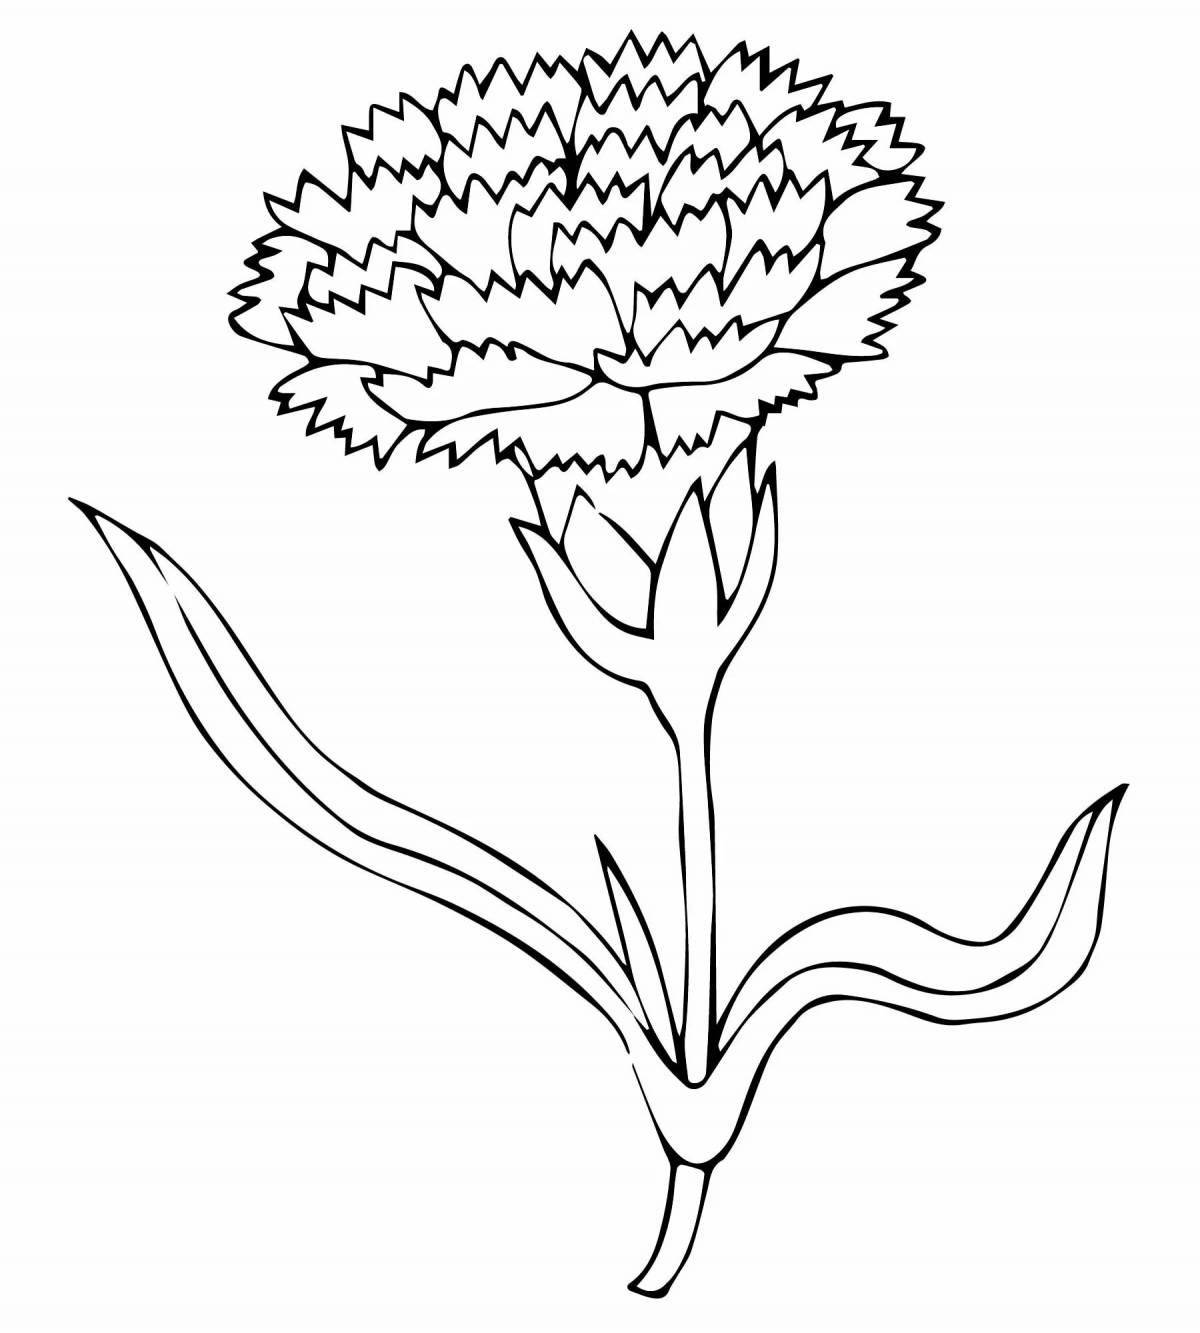 Coloring book sparkling 2 carnations